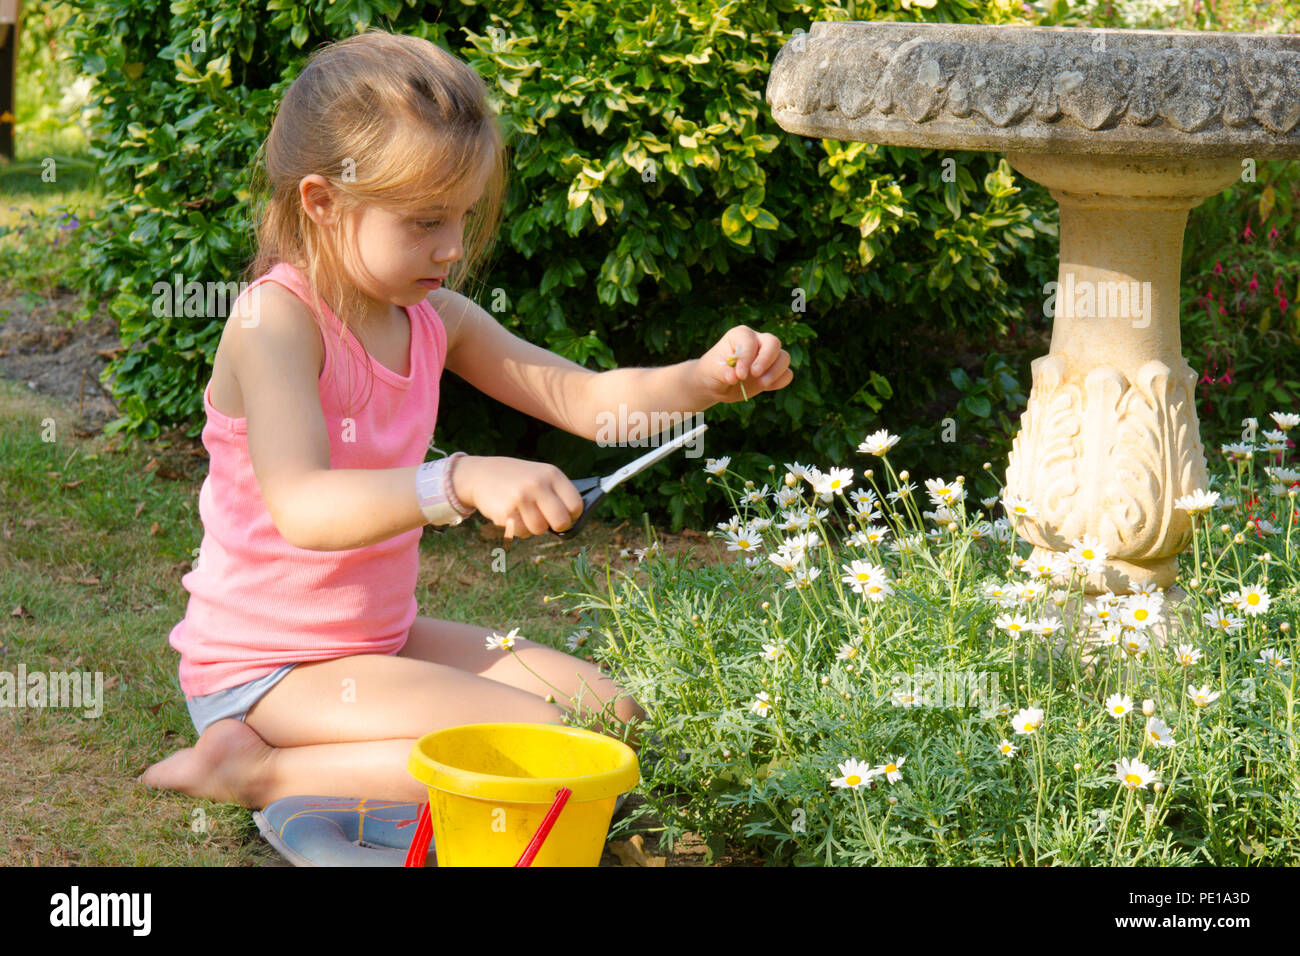 young girl child gardening cutting dead flowers, dead-heading, daisies, scissors, five years old, UK summer. Stock Photo